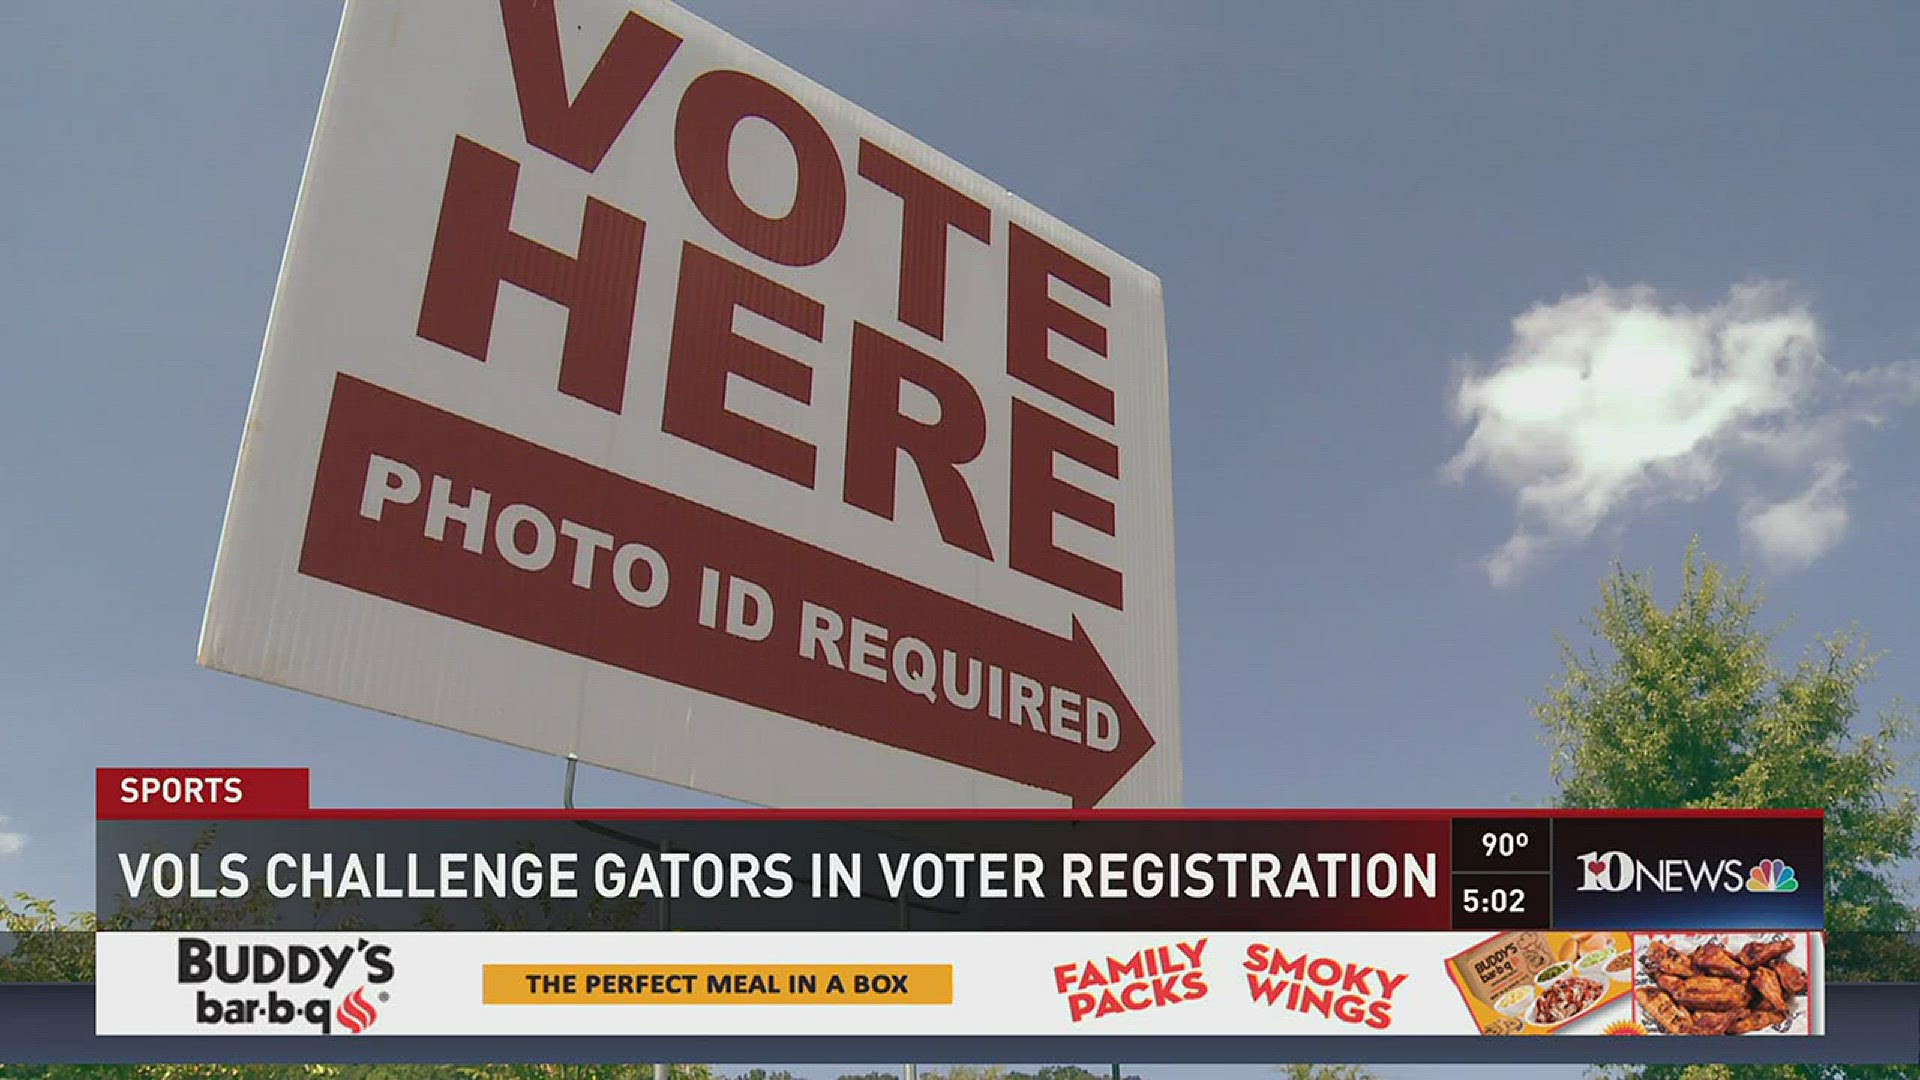 UT and Knoxville's Howard H. Baker Jr. Center for Public Policy have challenged the Gators to see which school can register the most students to vote.